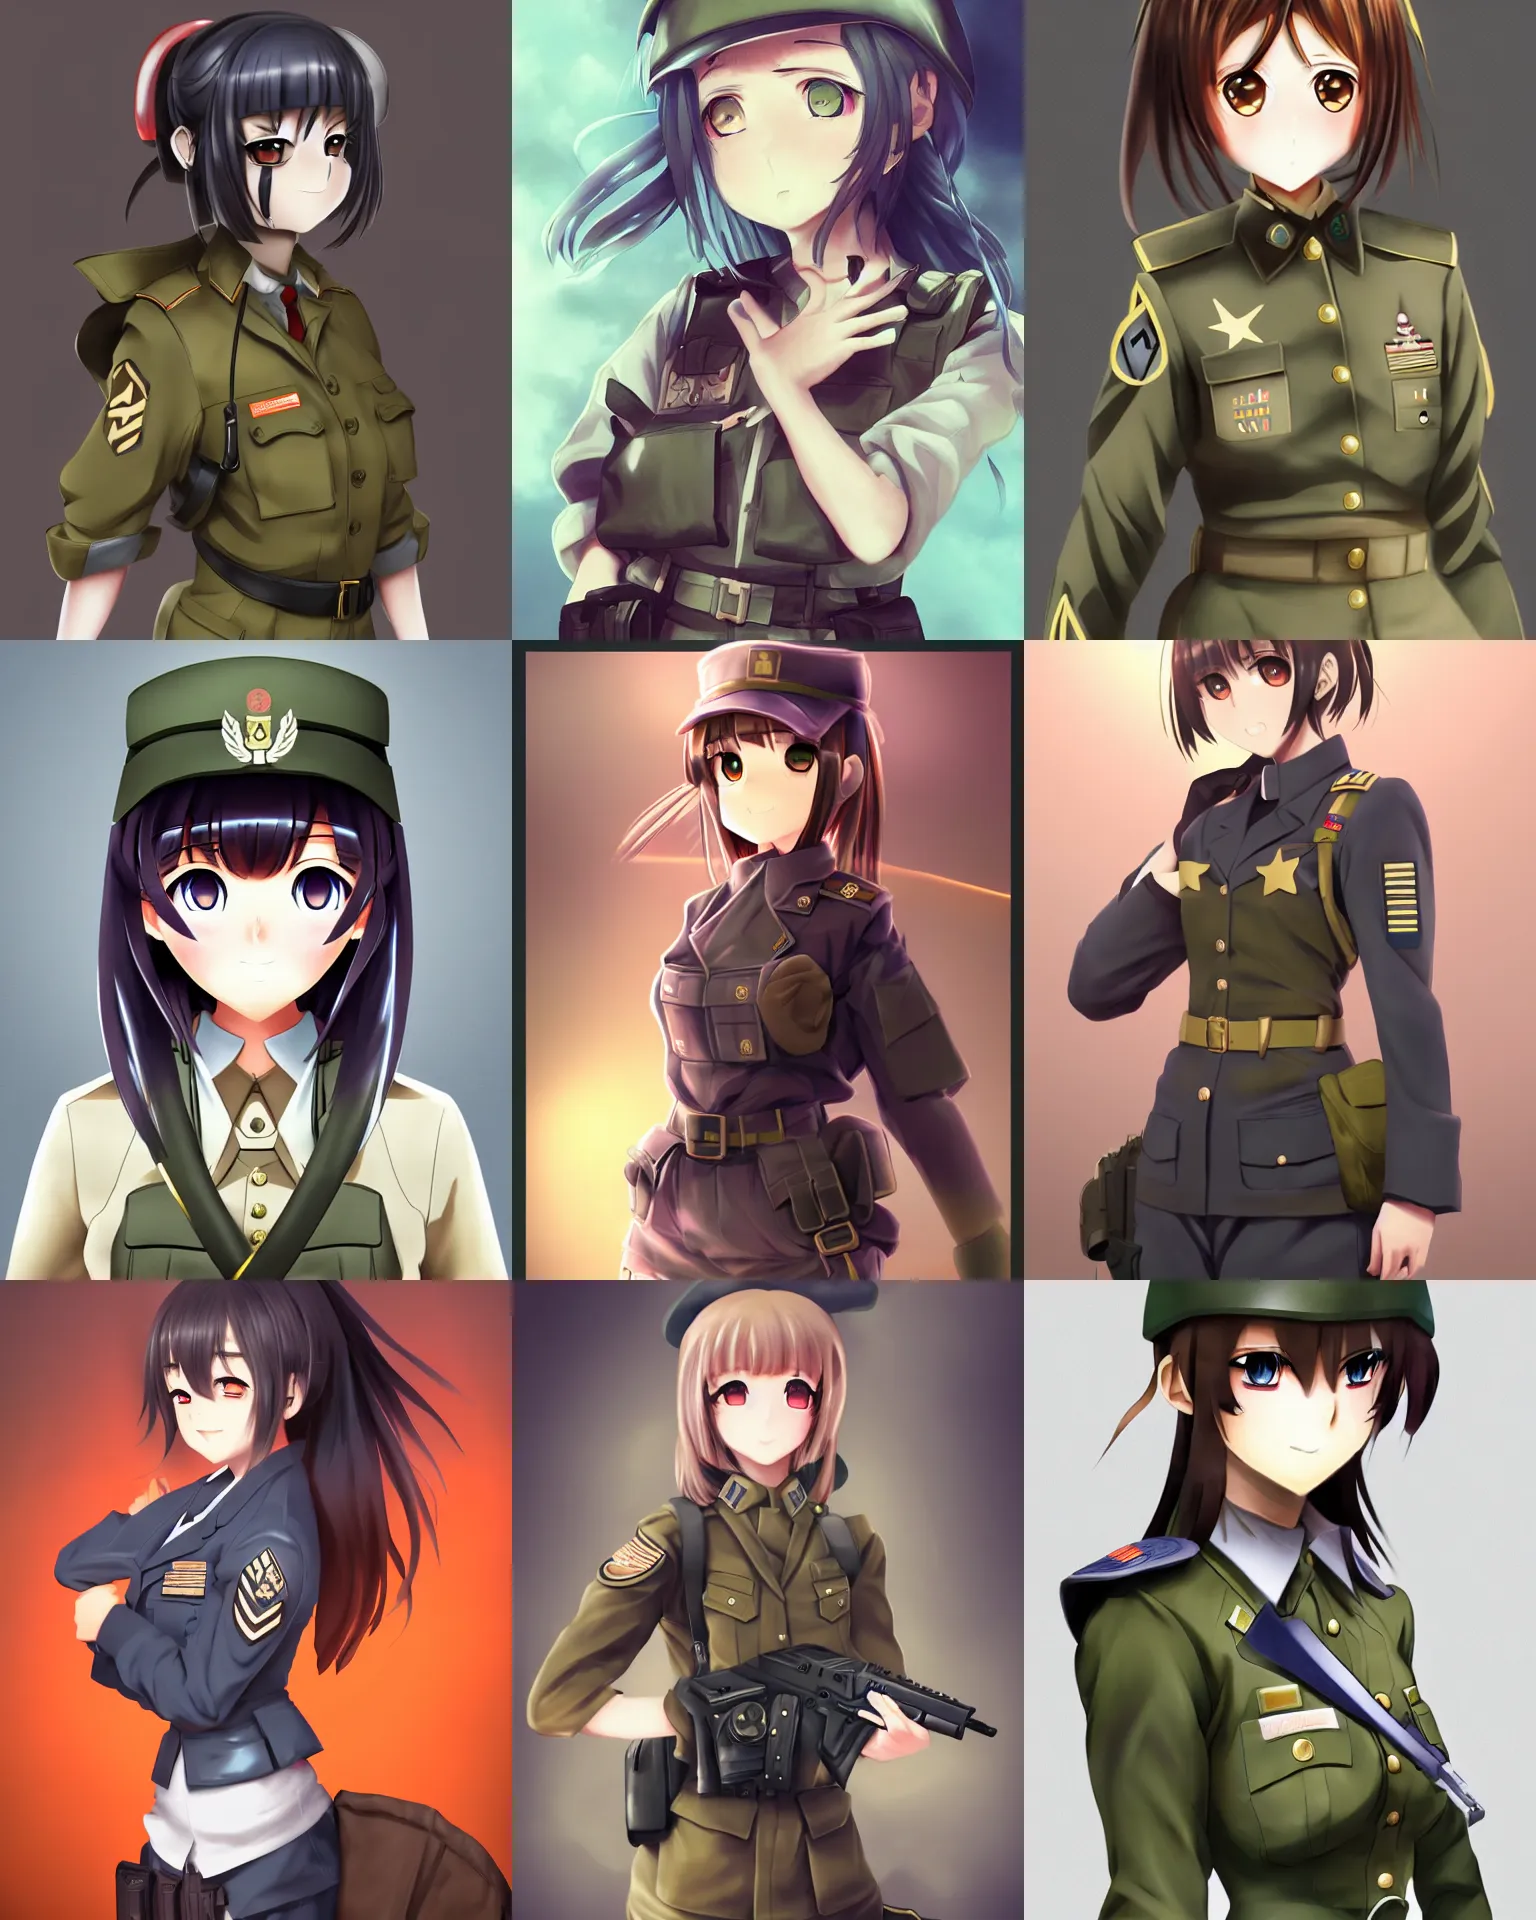 Pin on Illustration and Fan art with Tactical or Military